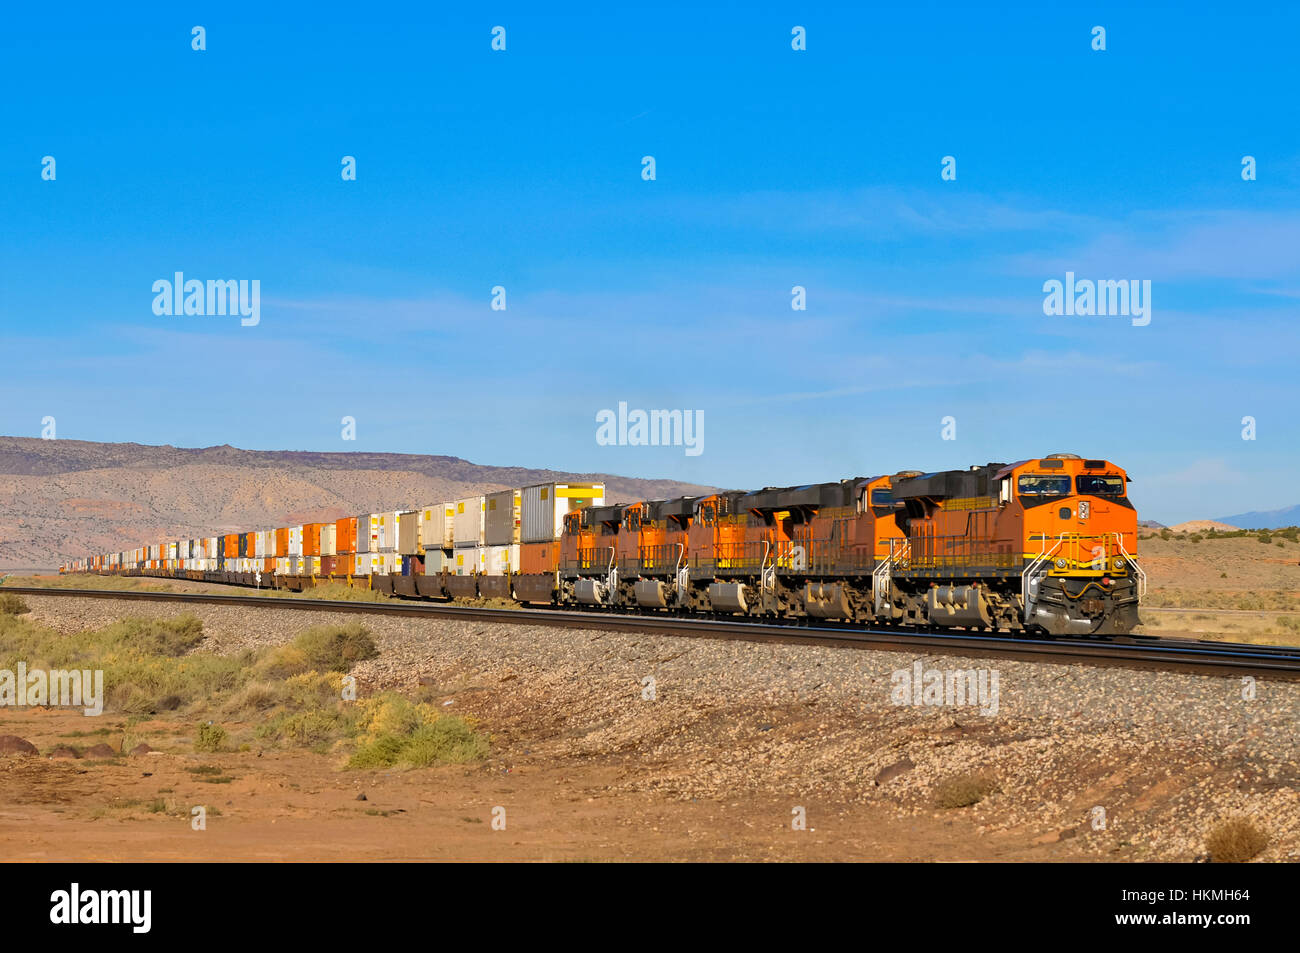 freight train with four locomotives and wagons full of containers in the desert, Arizona, USA Stock Photo